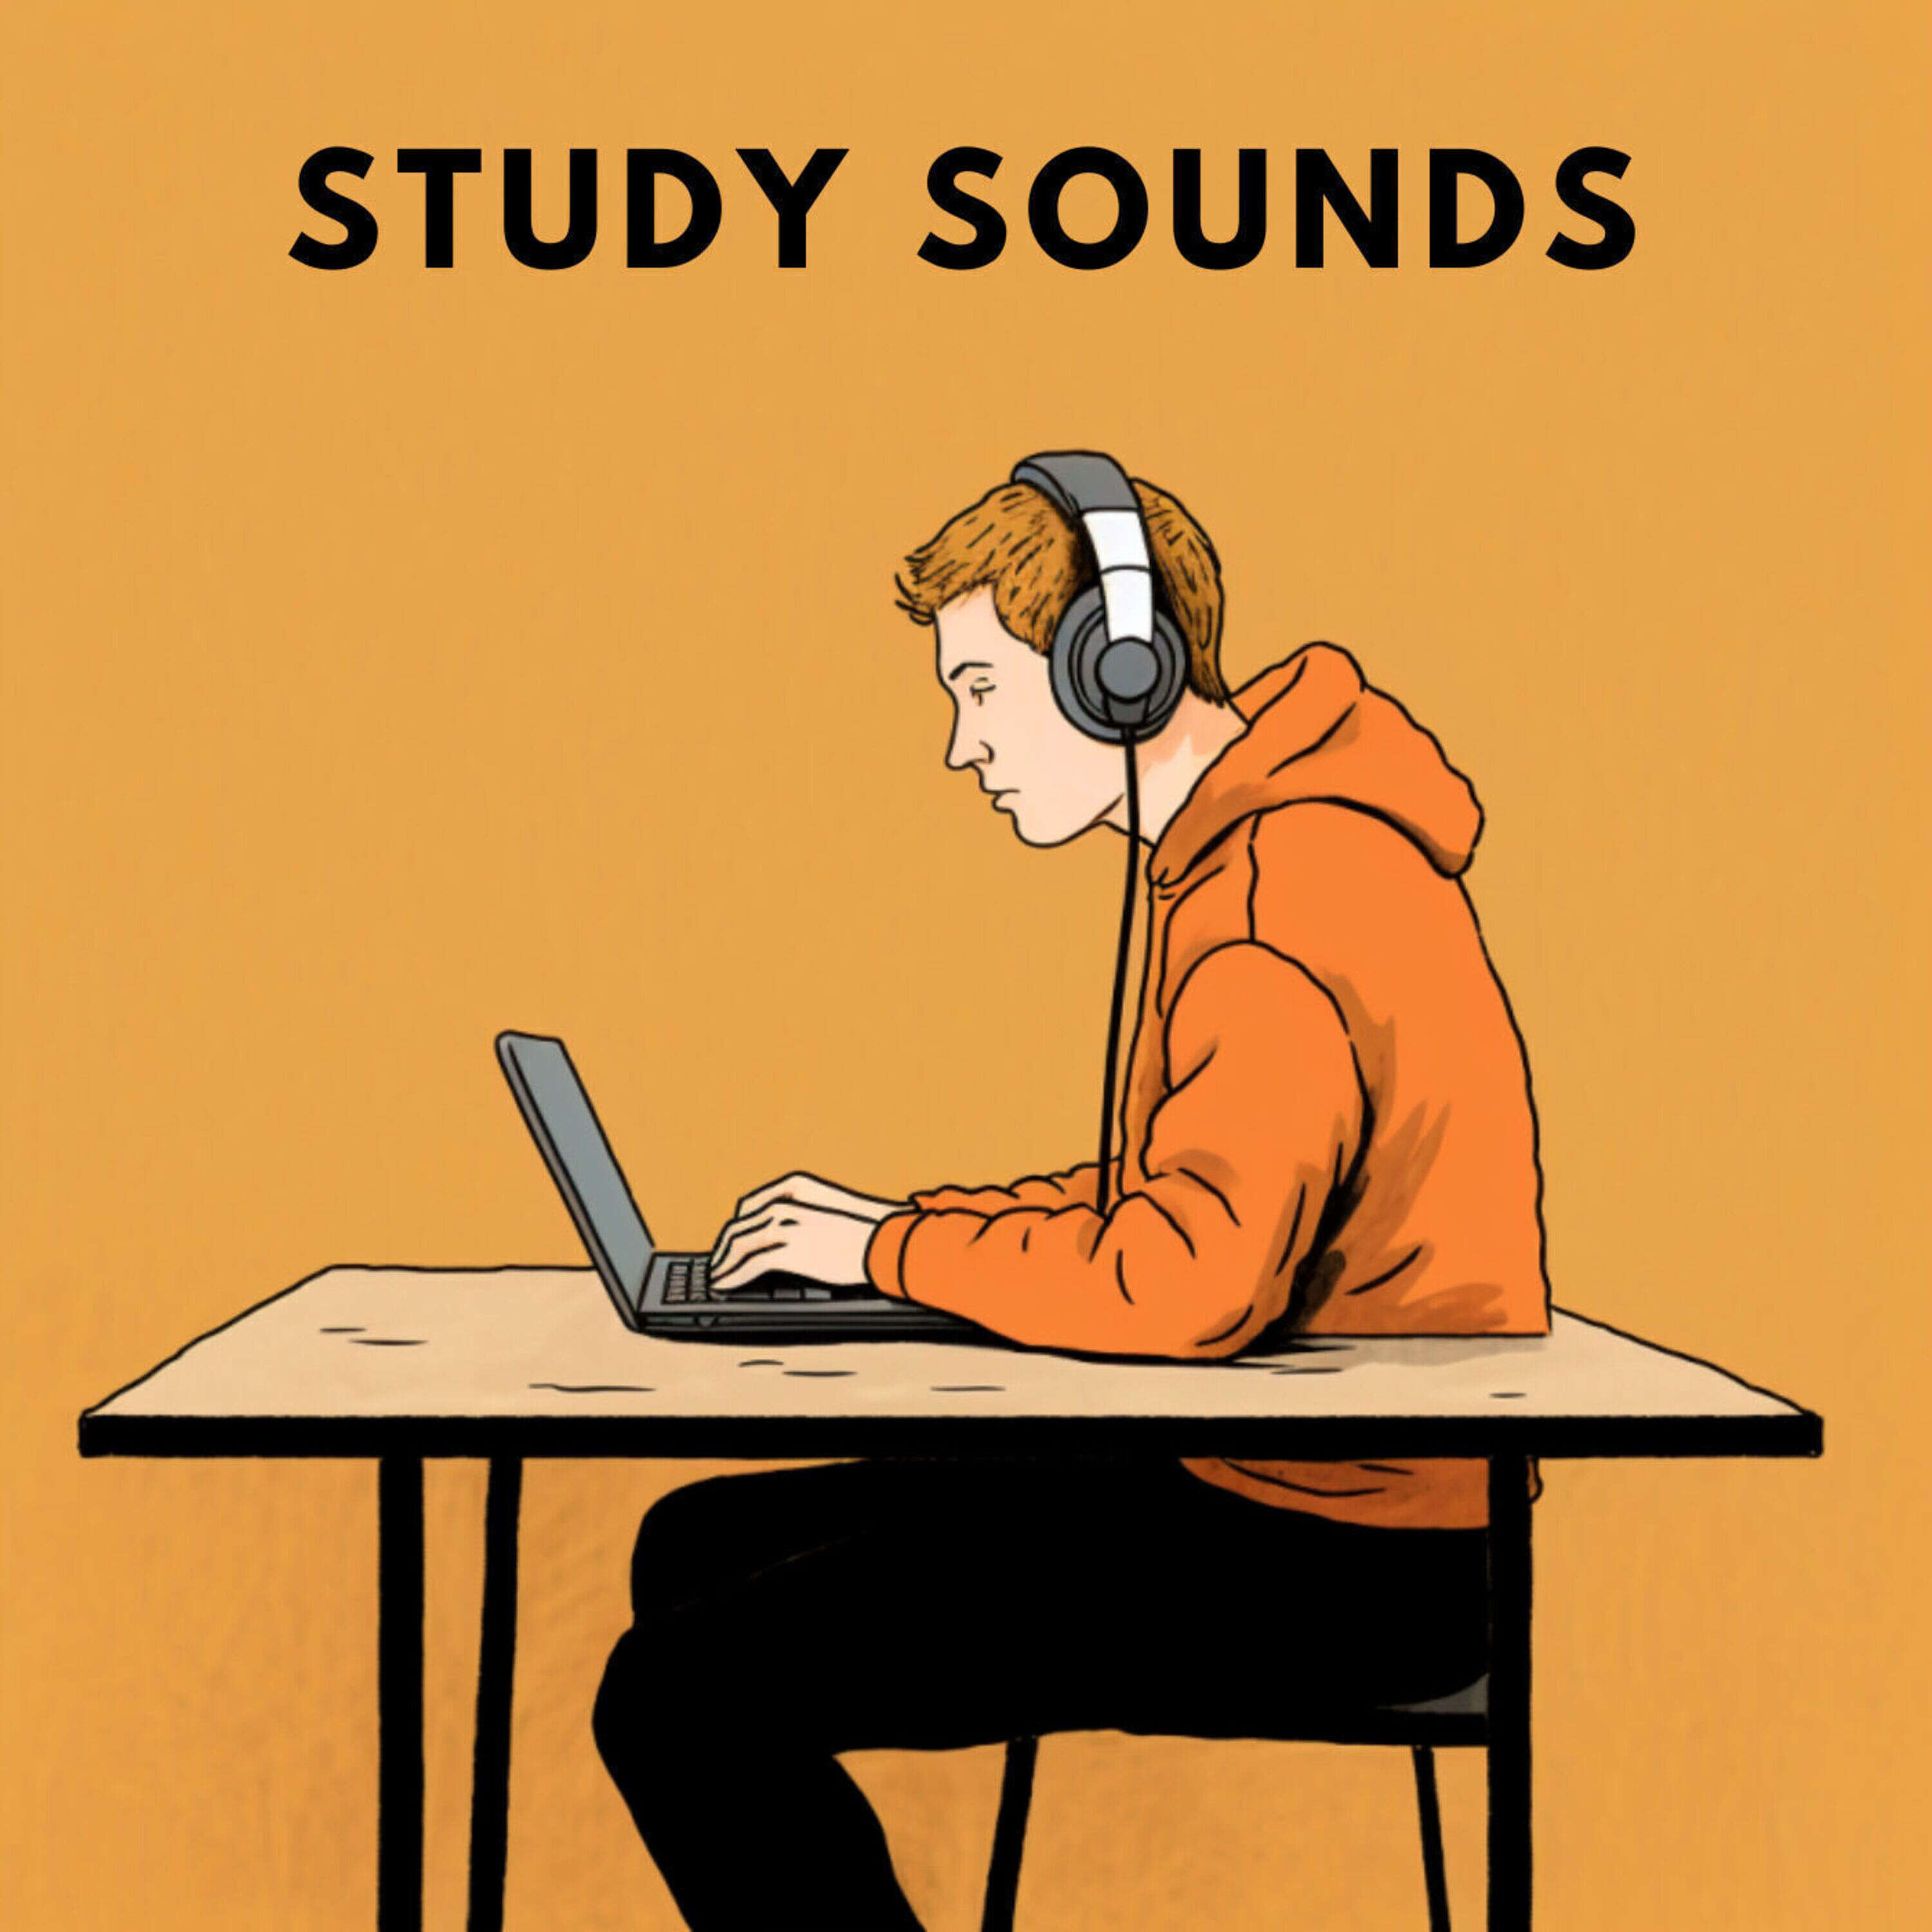 1 HOUR The best relaxing piano sounds for studying or reading